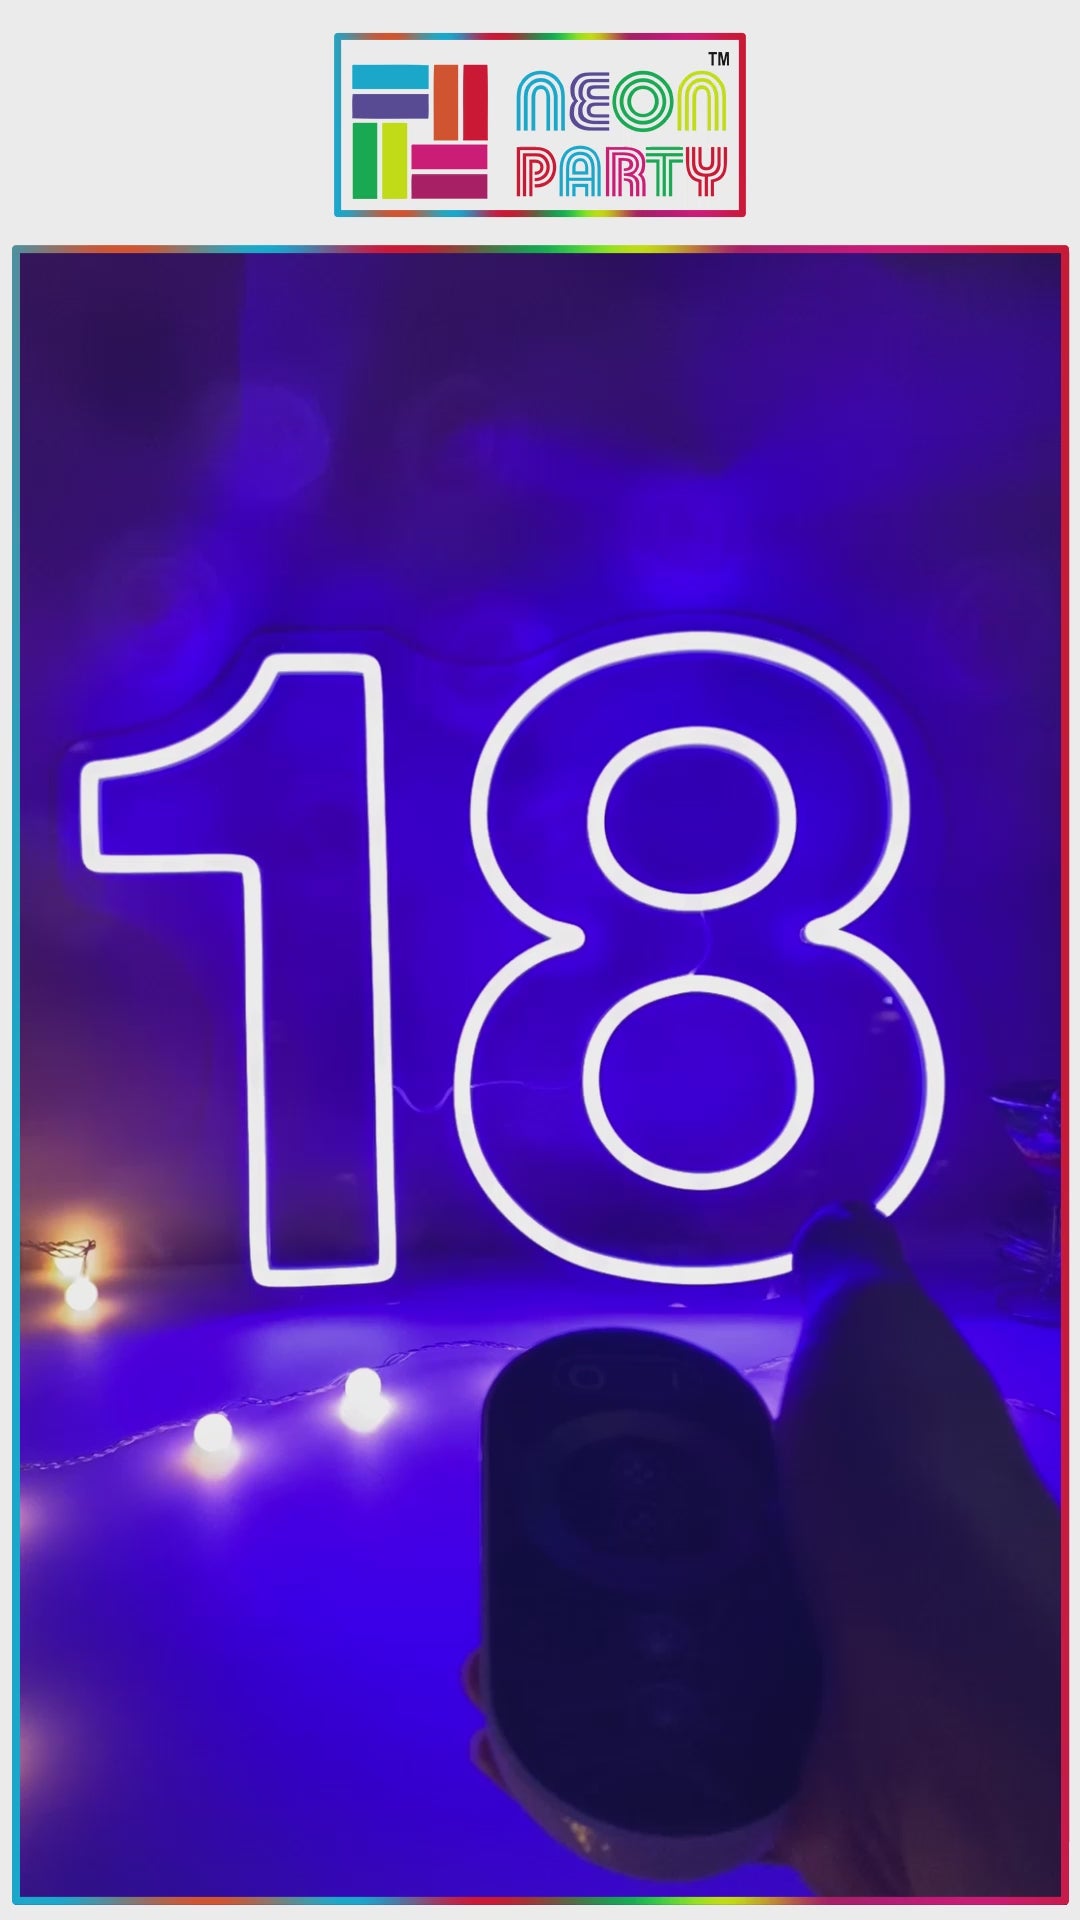 18th Birthday Party Sign